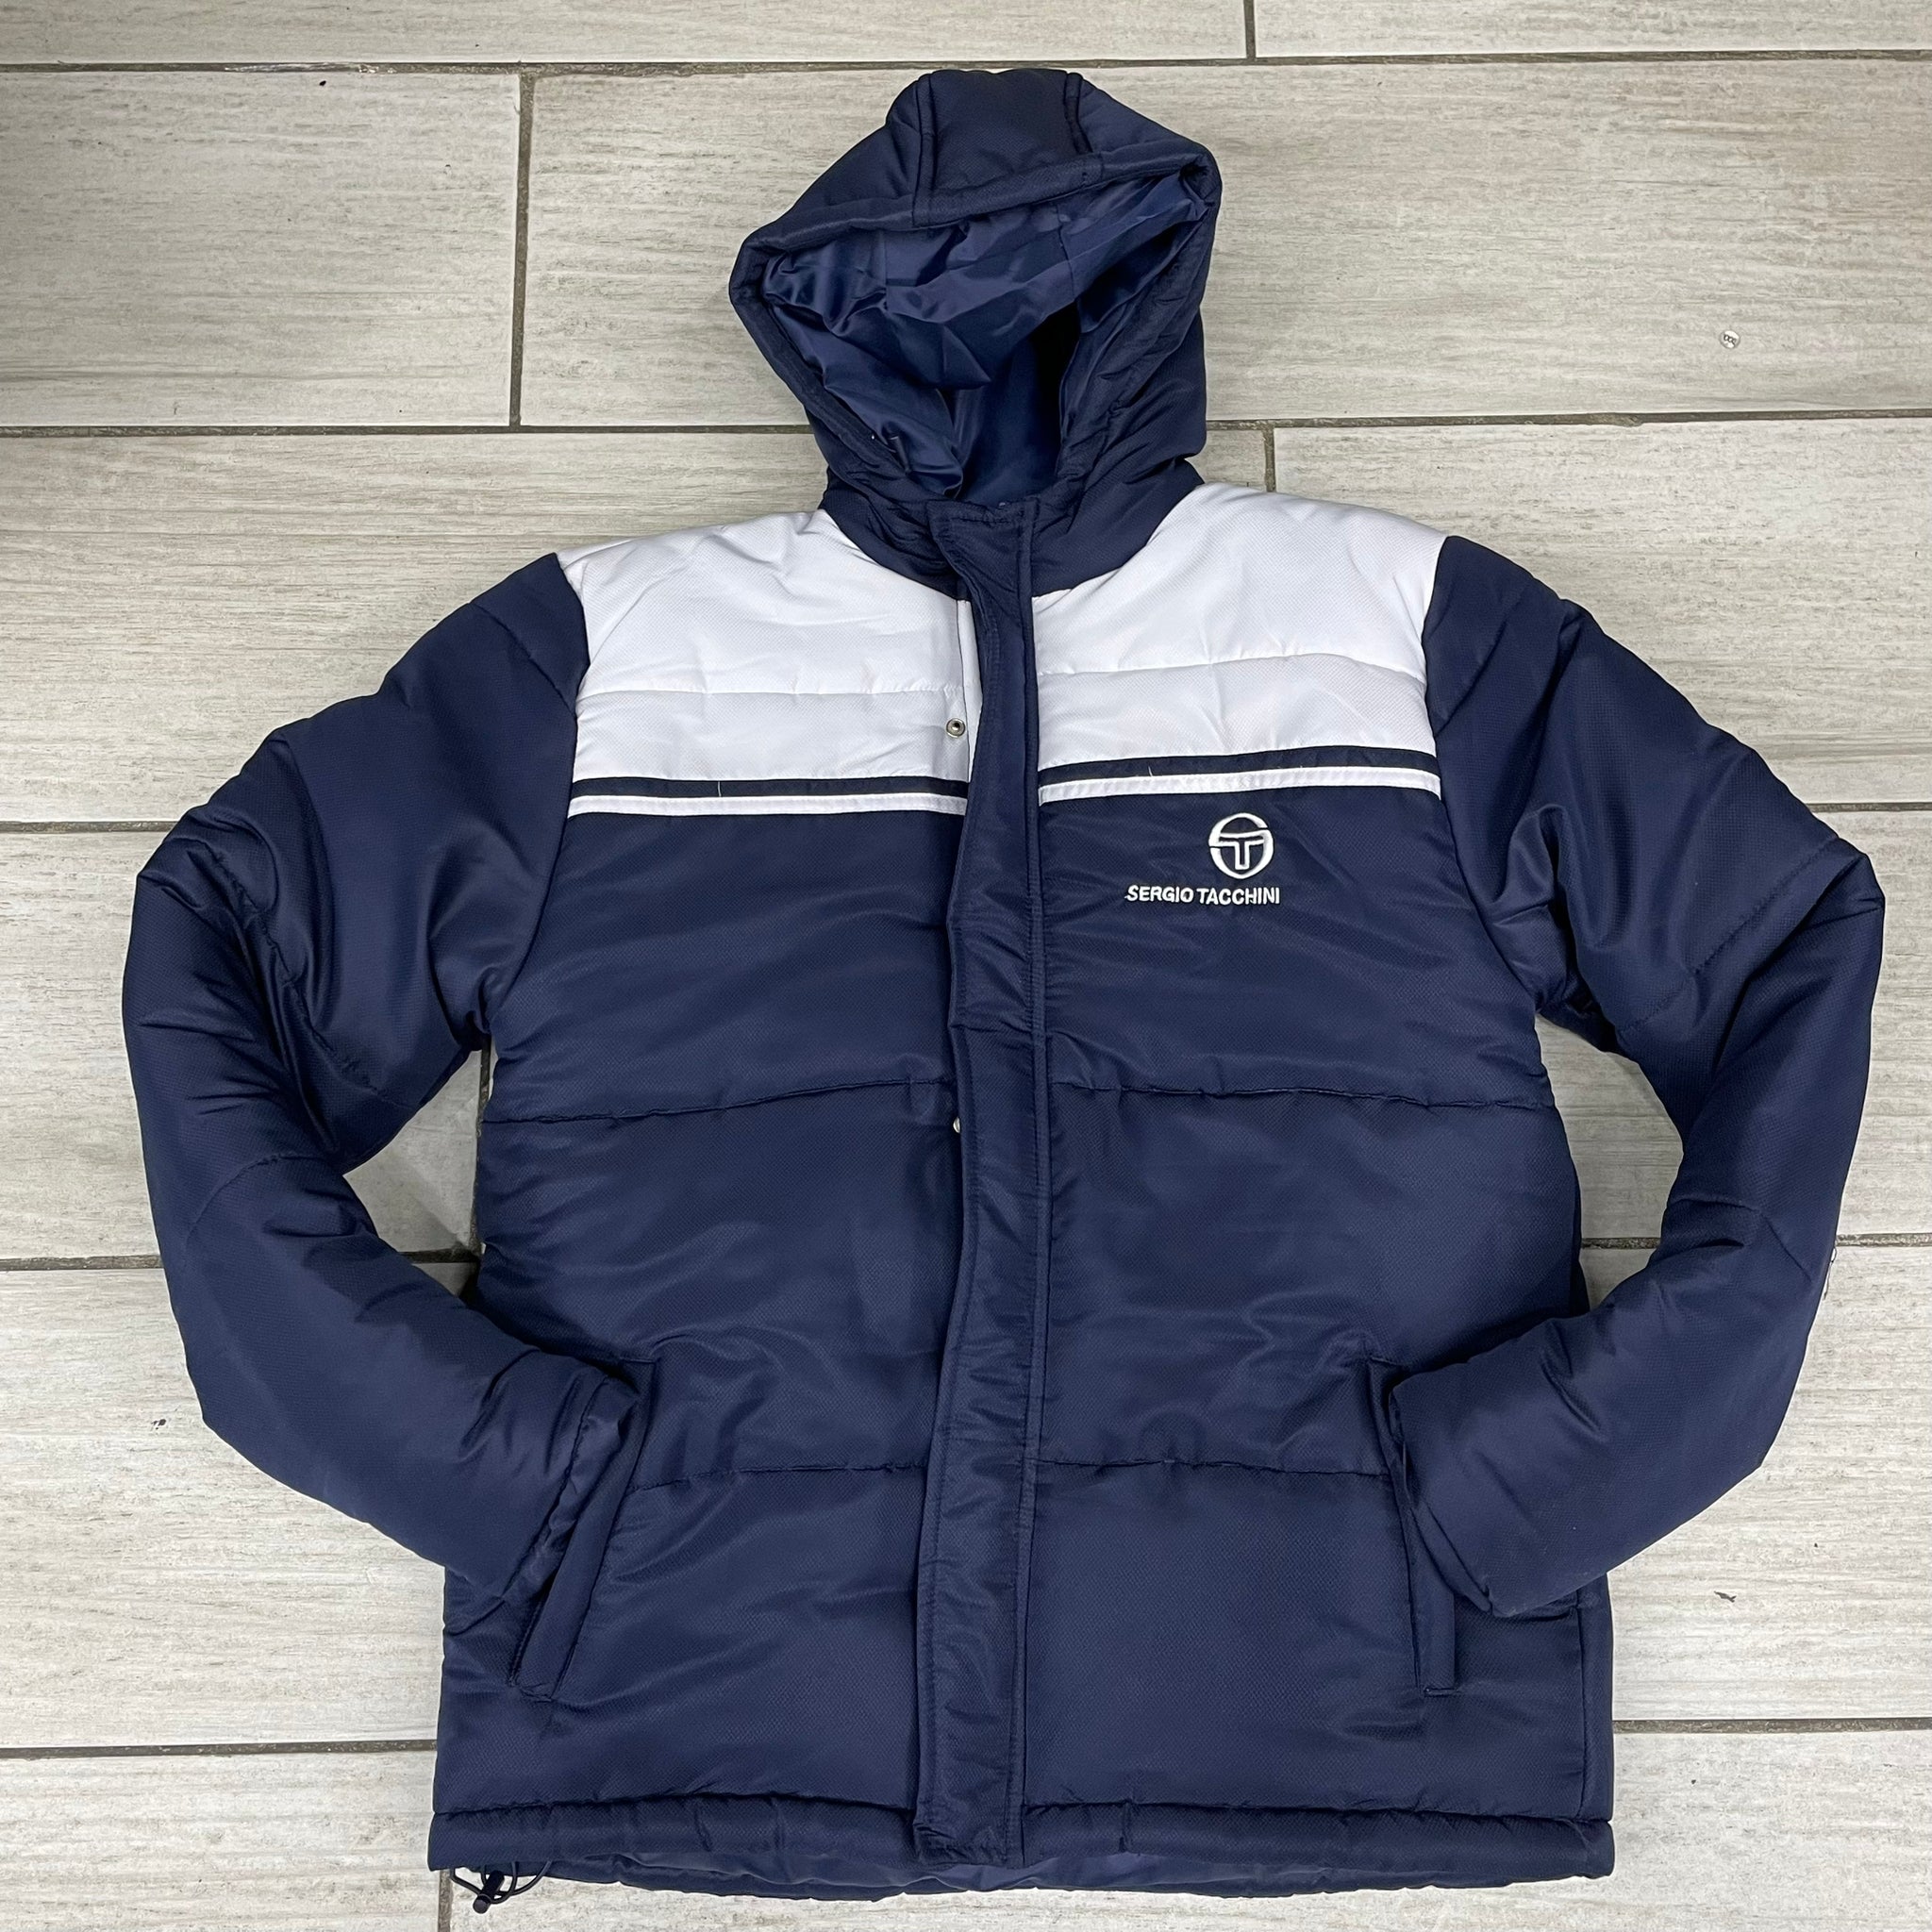 Sergio Tacchini  new young line puffer jacket  tracksuit  Blue/white (T)